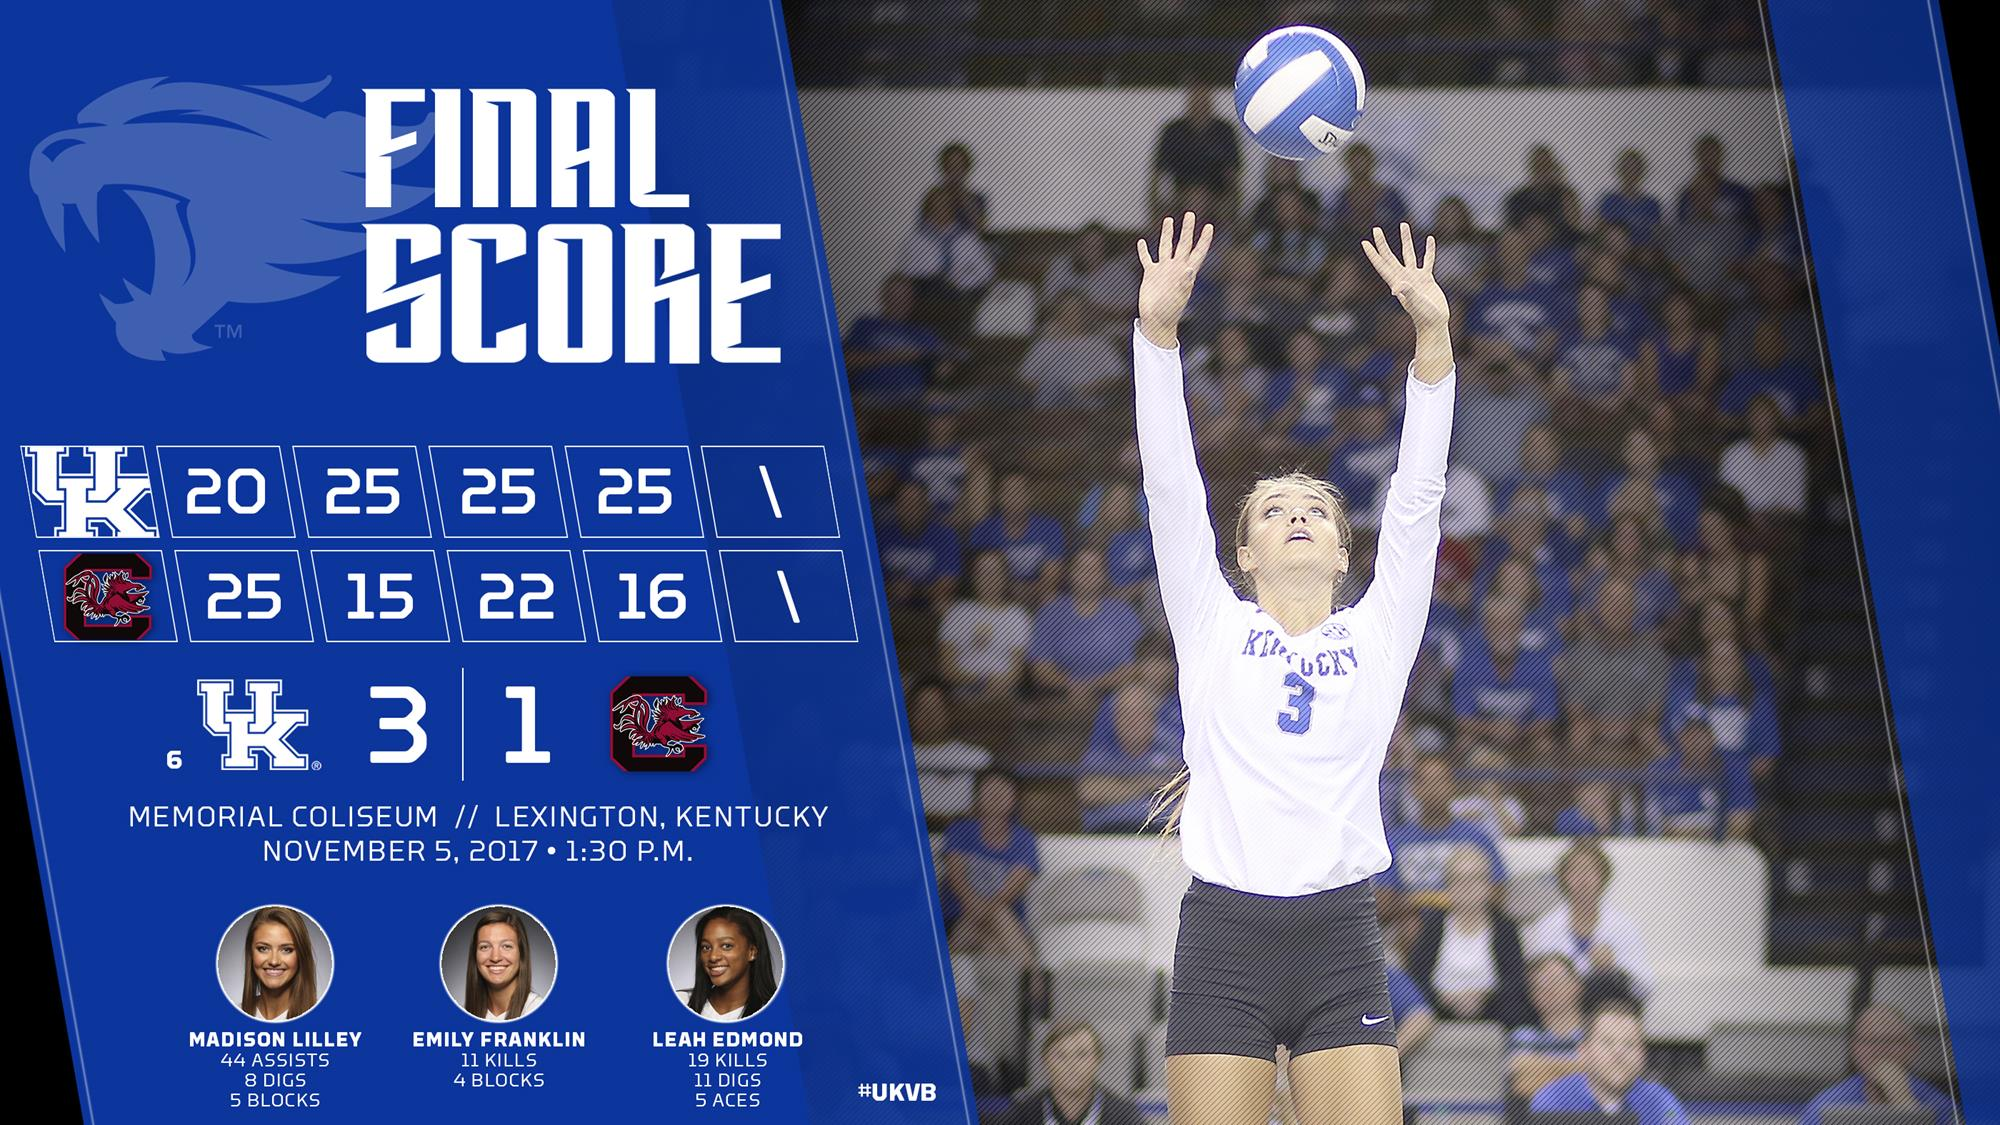 Wildcats Bounce Back with Win over South Carolina